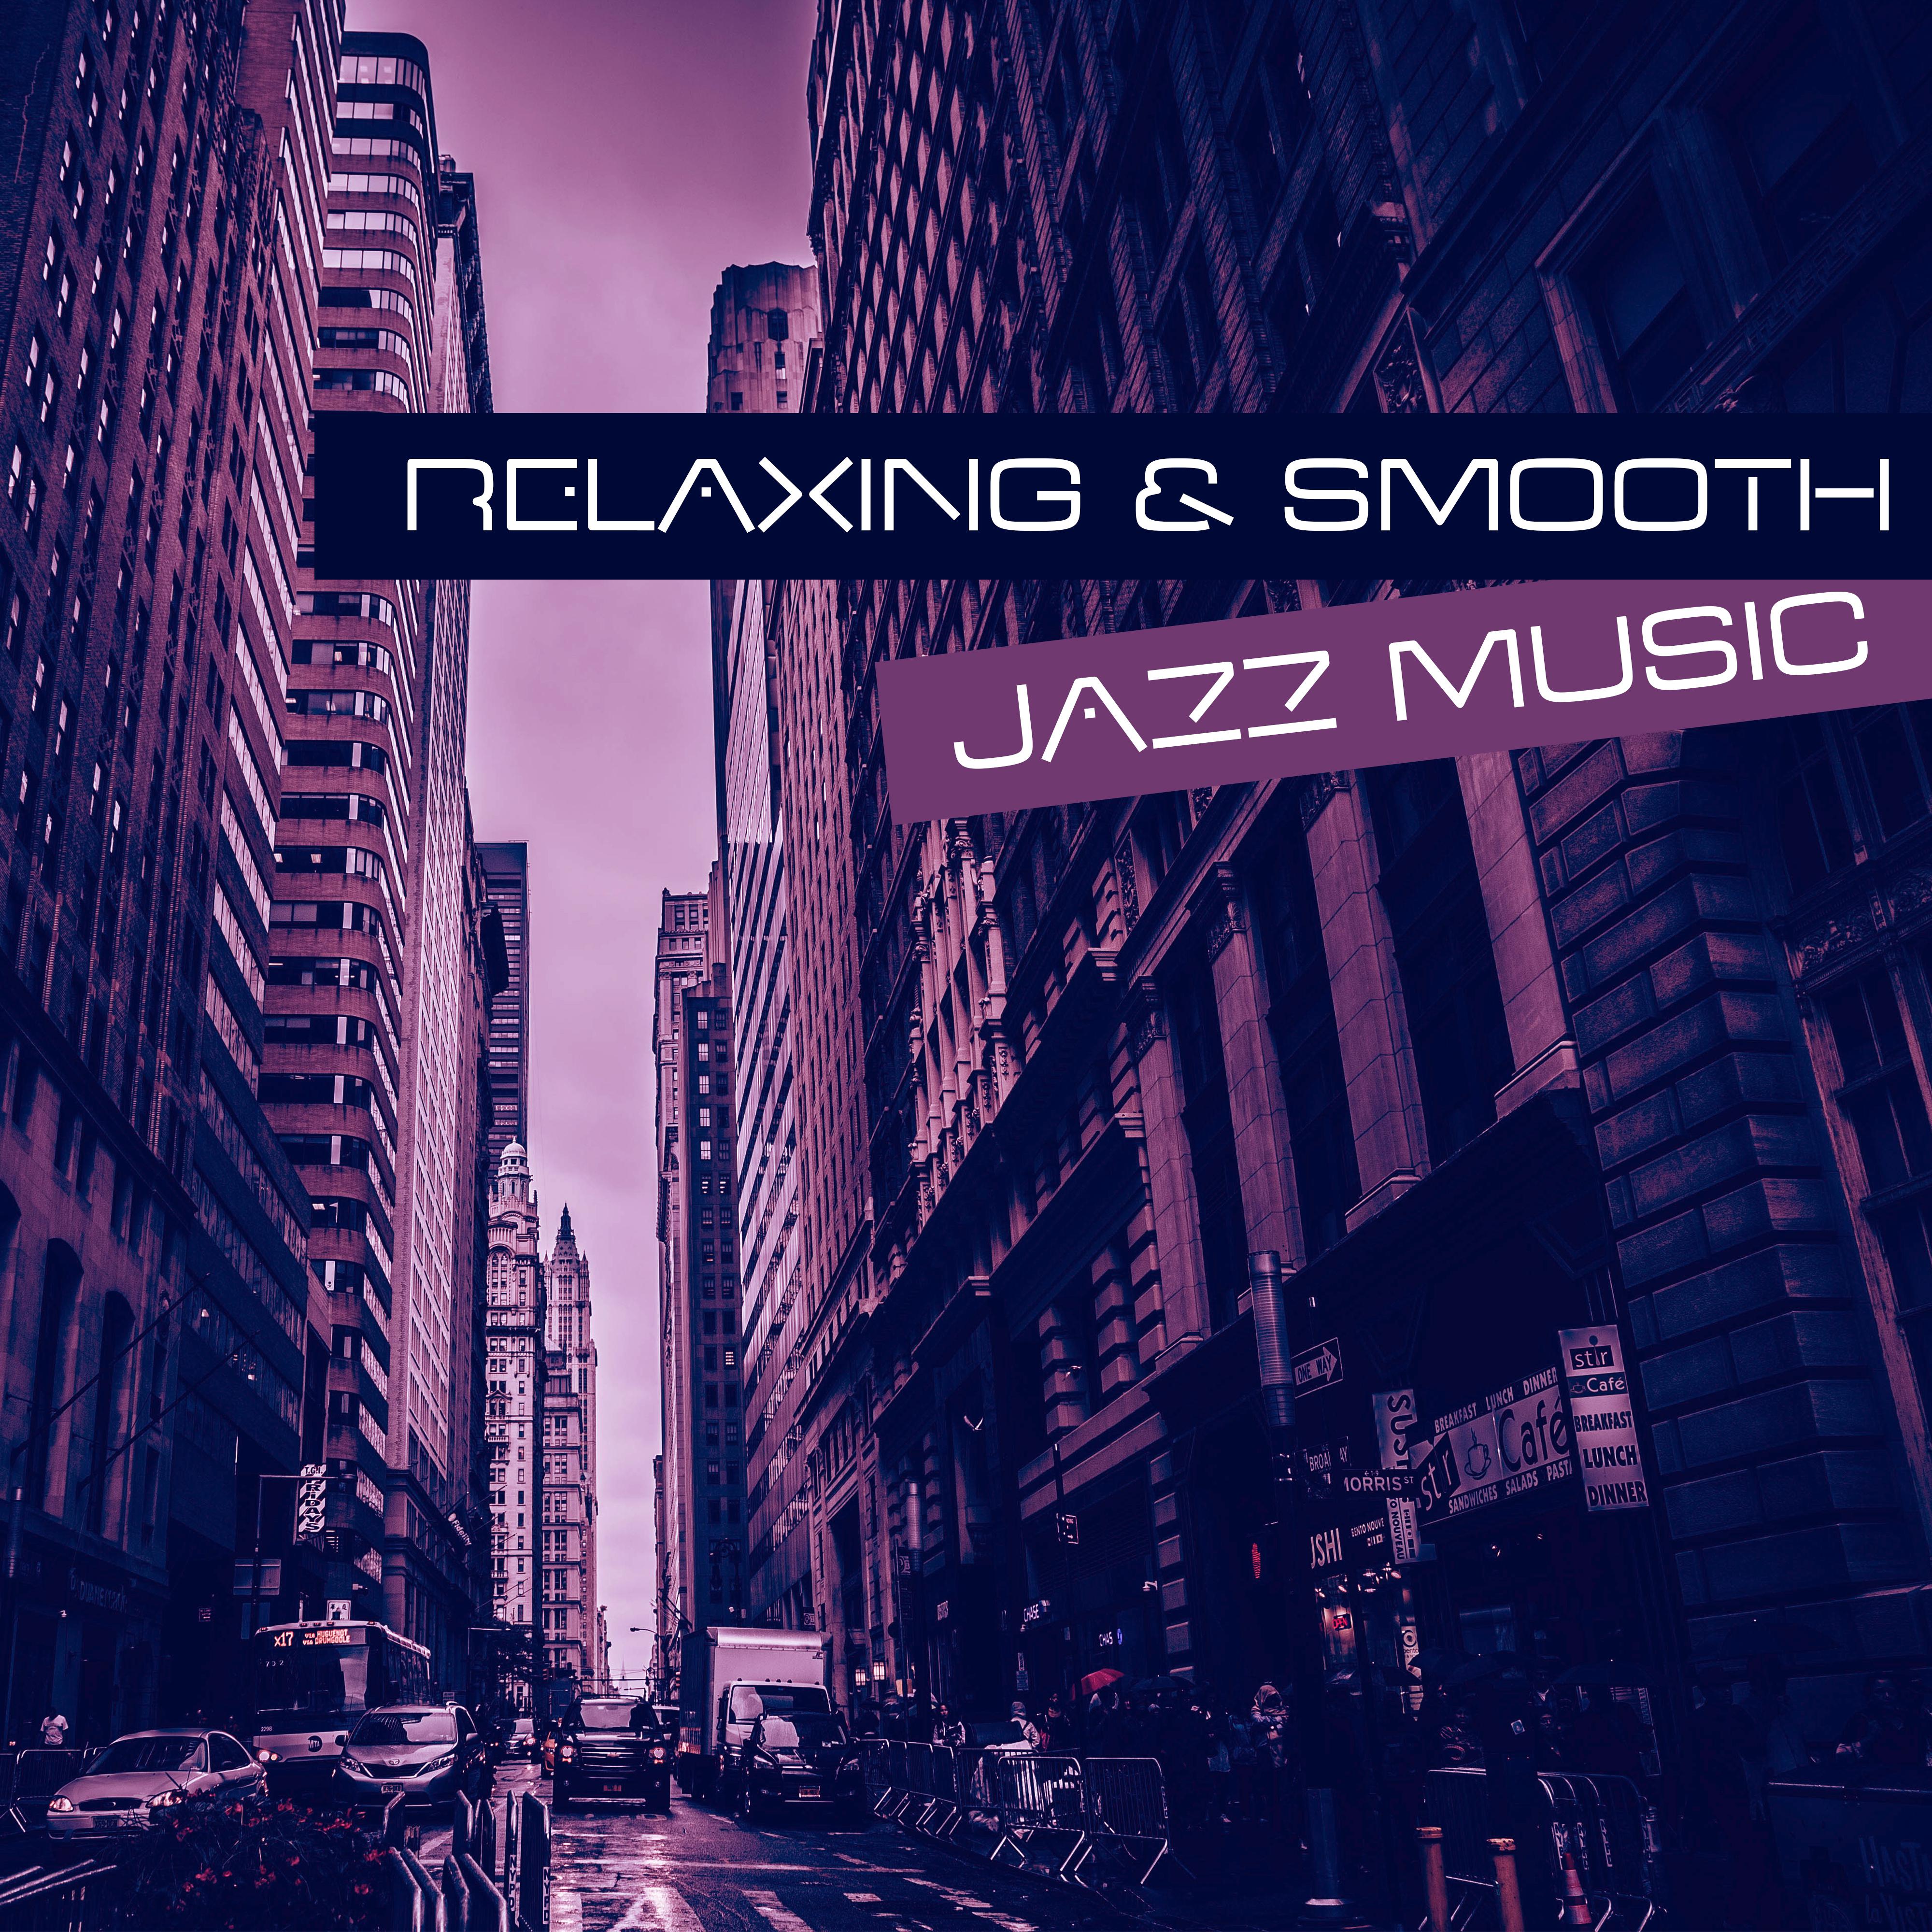 Relaxing  Smooth Jazz Music  Calm Down with Jazz Music, Rest a Bit, Evening Jazz Club, Moon Jazz